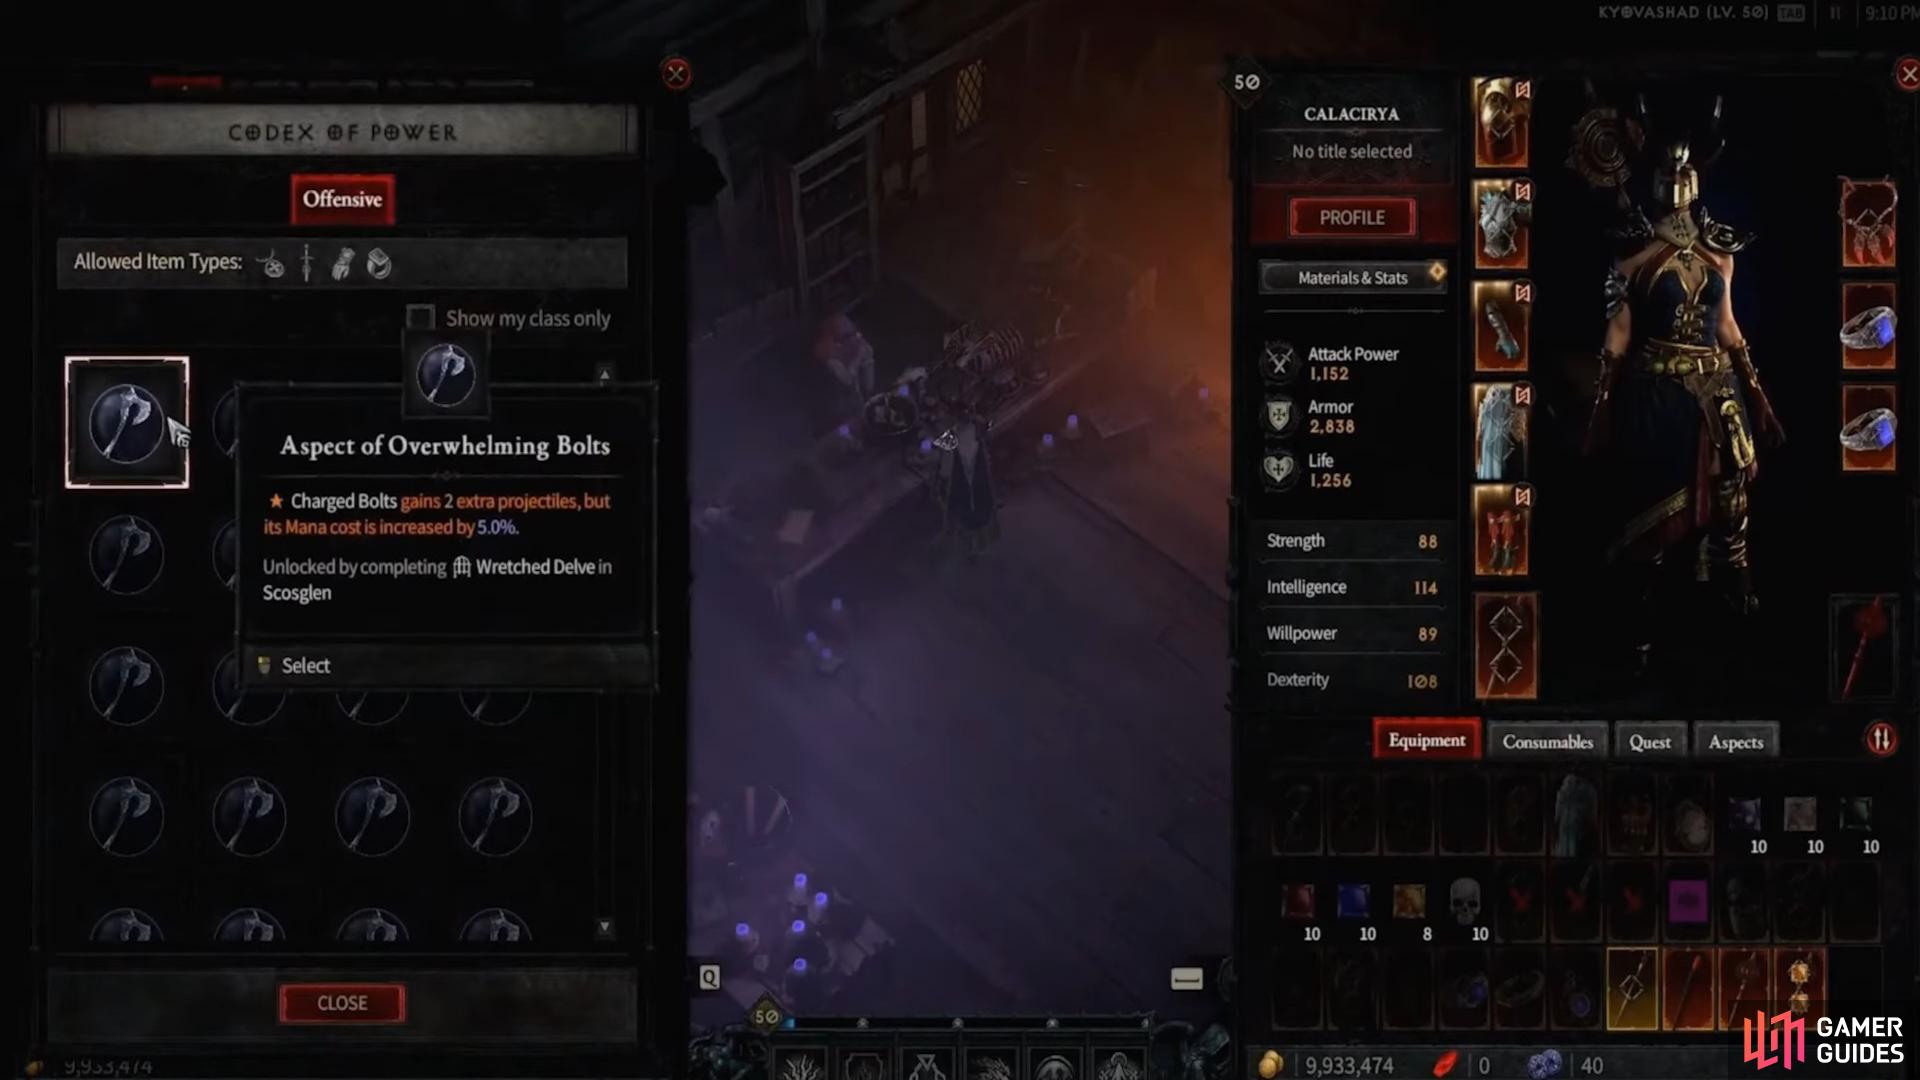 Players can visit the Occultist to modify legendary affixes using Diablo 4's Codex of Power system. Image via Blizzard Entertainment.